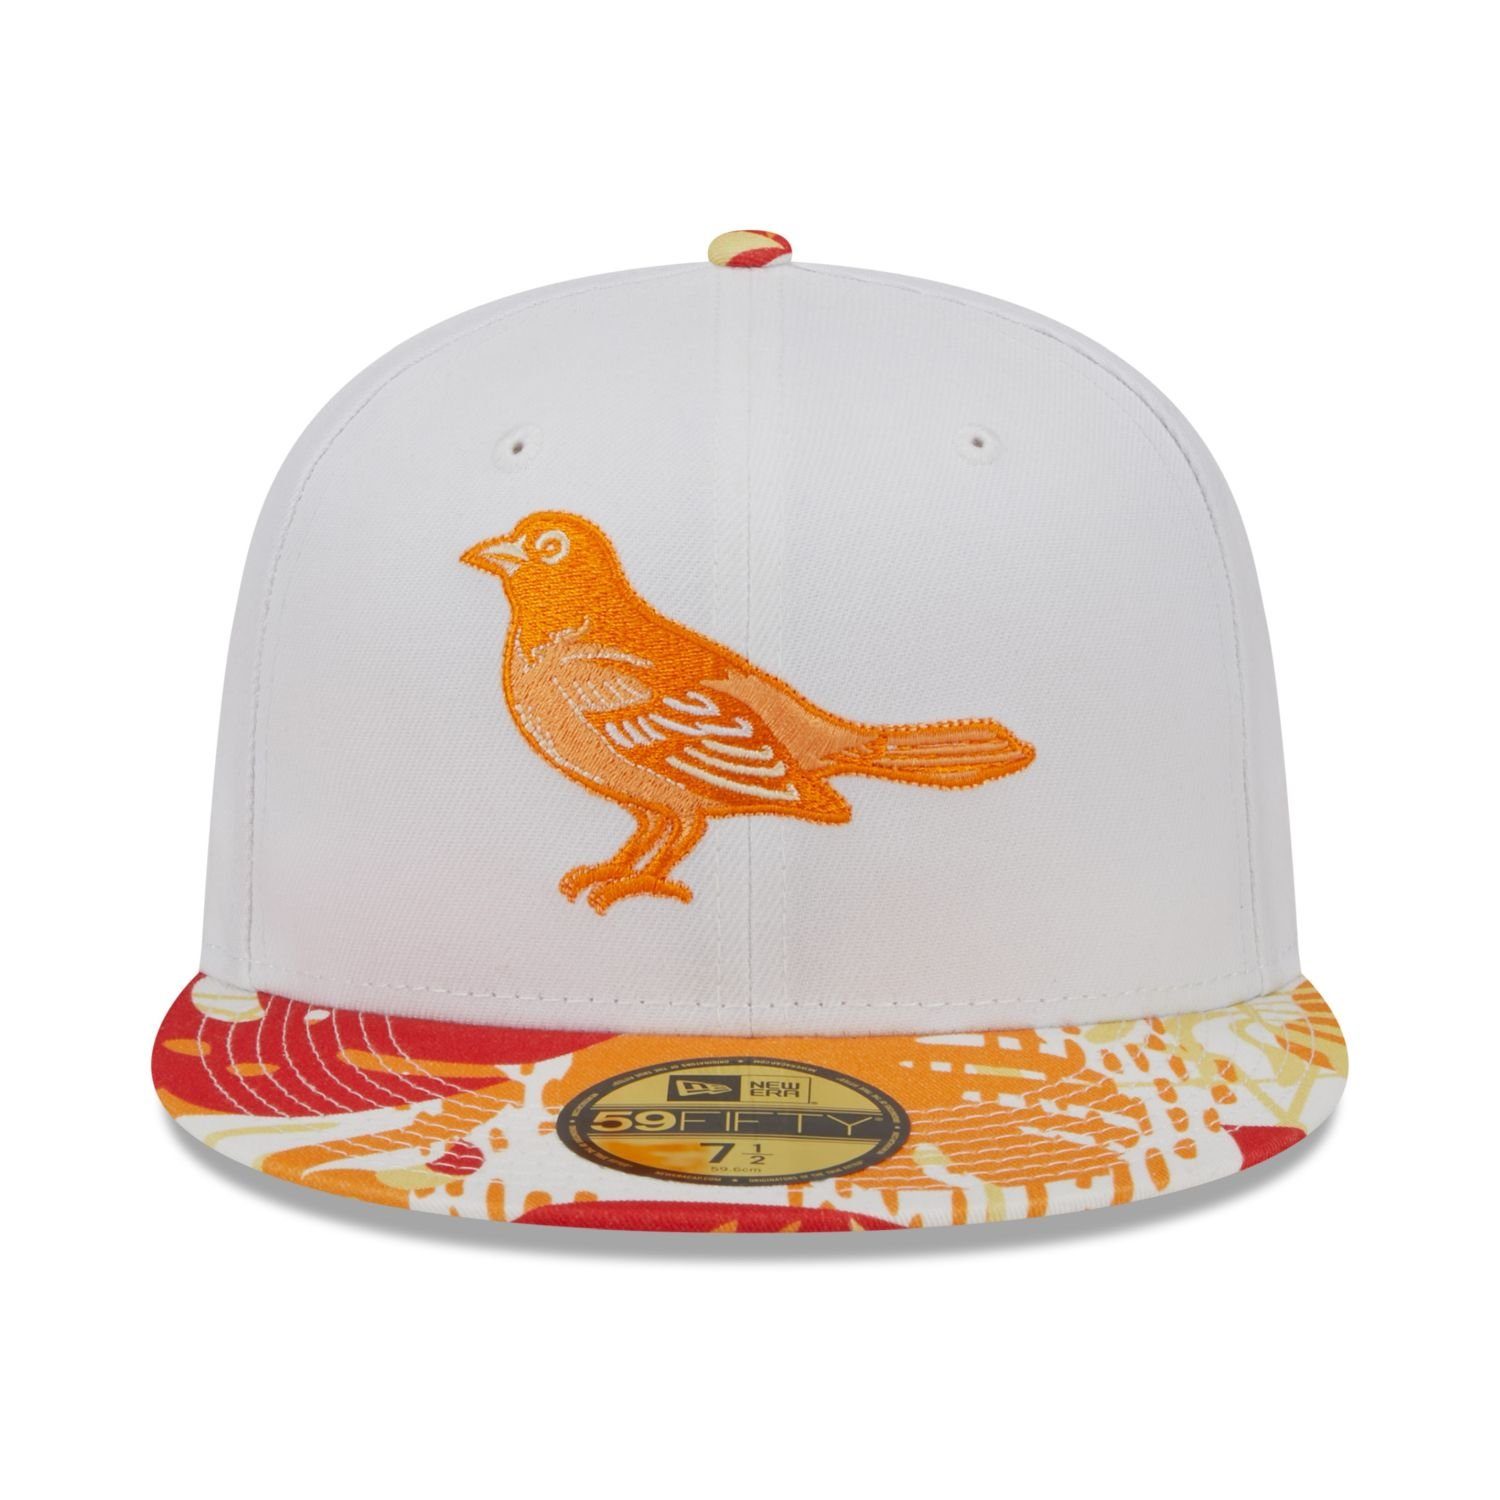 floral New Orioles Cap 59Fifty Fitted Era Baltimore